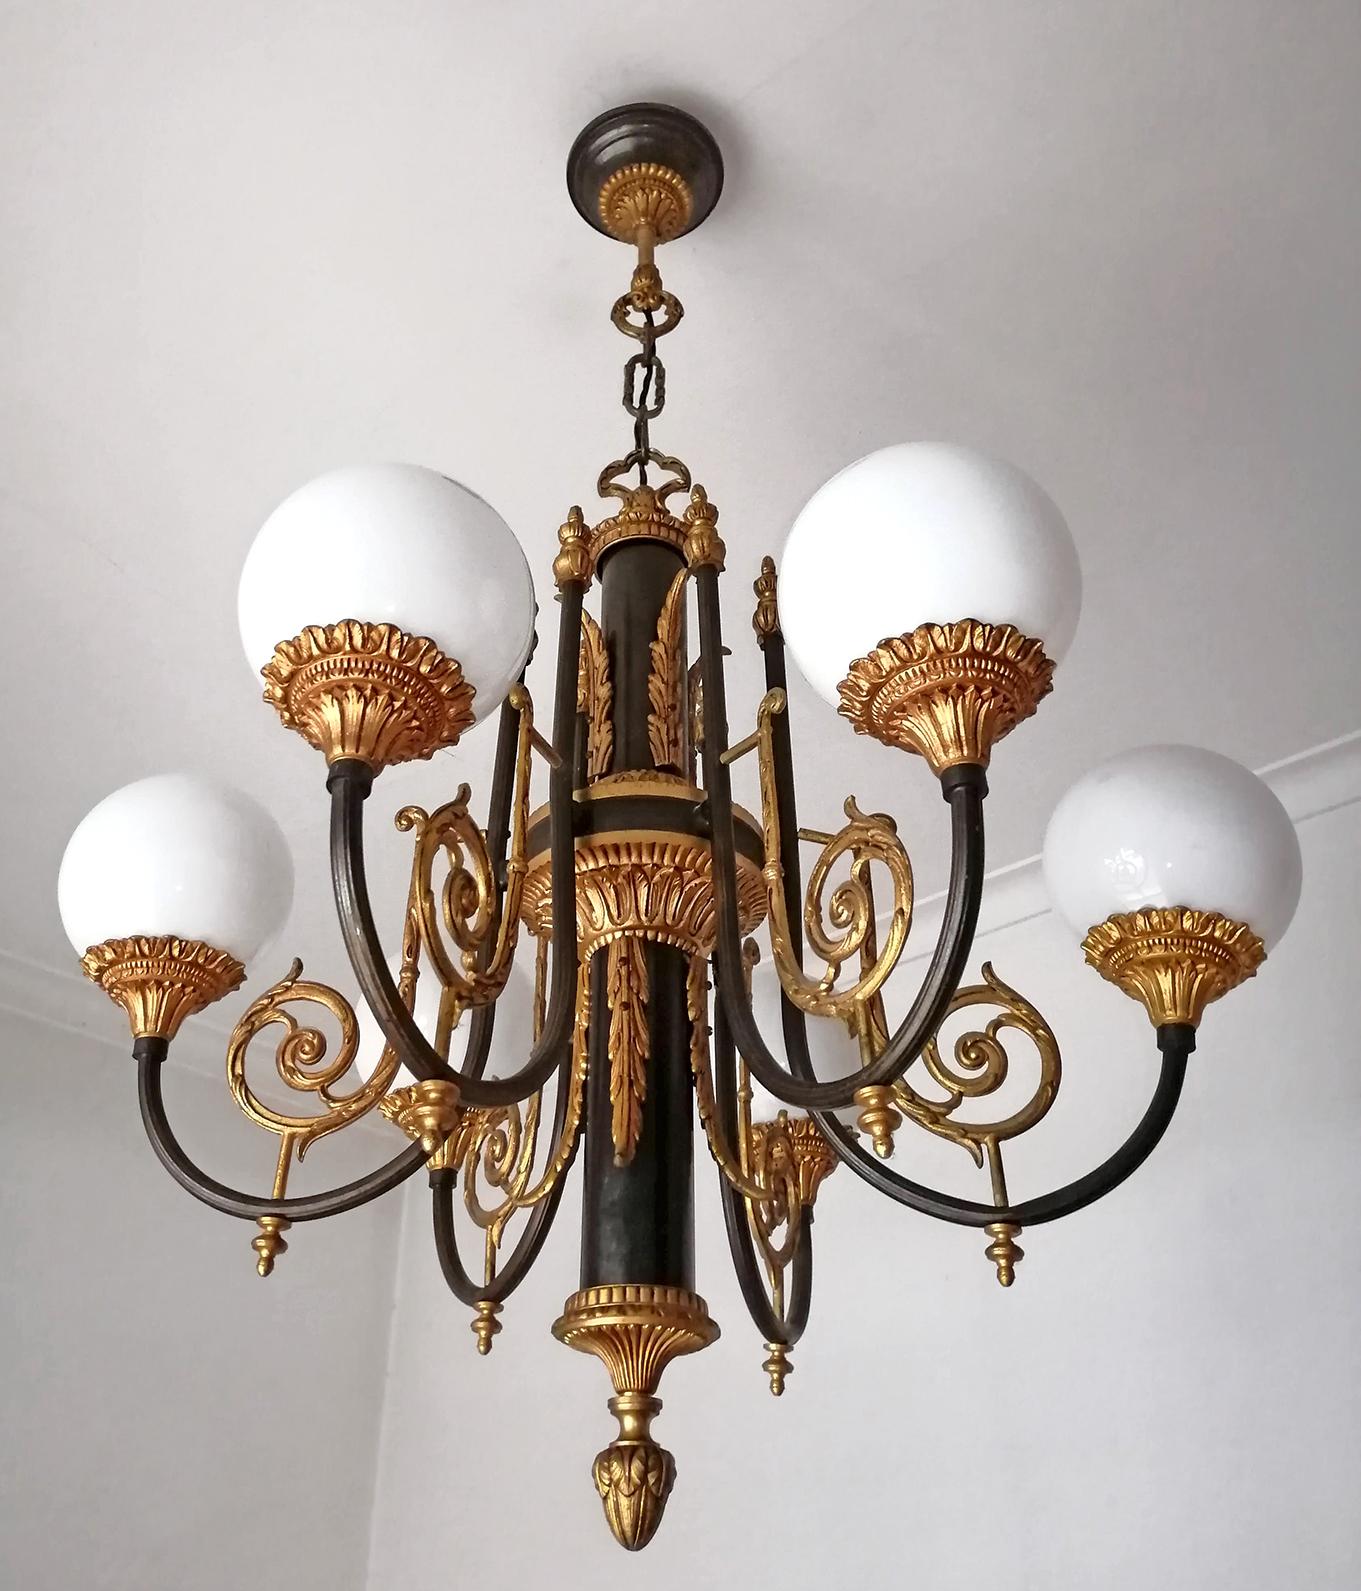 Antique French Empire Neoclassical Gilt & Patina Bronze Opaline Globe Chandelier In Good Condition For Sale In Coimbra, PT